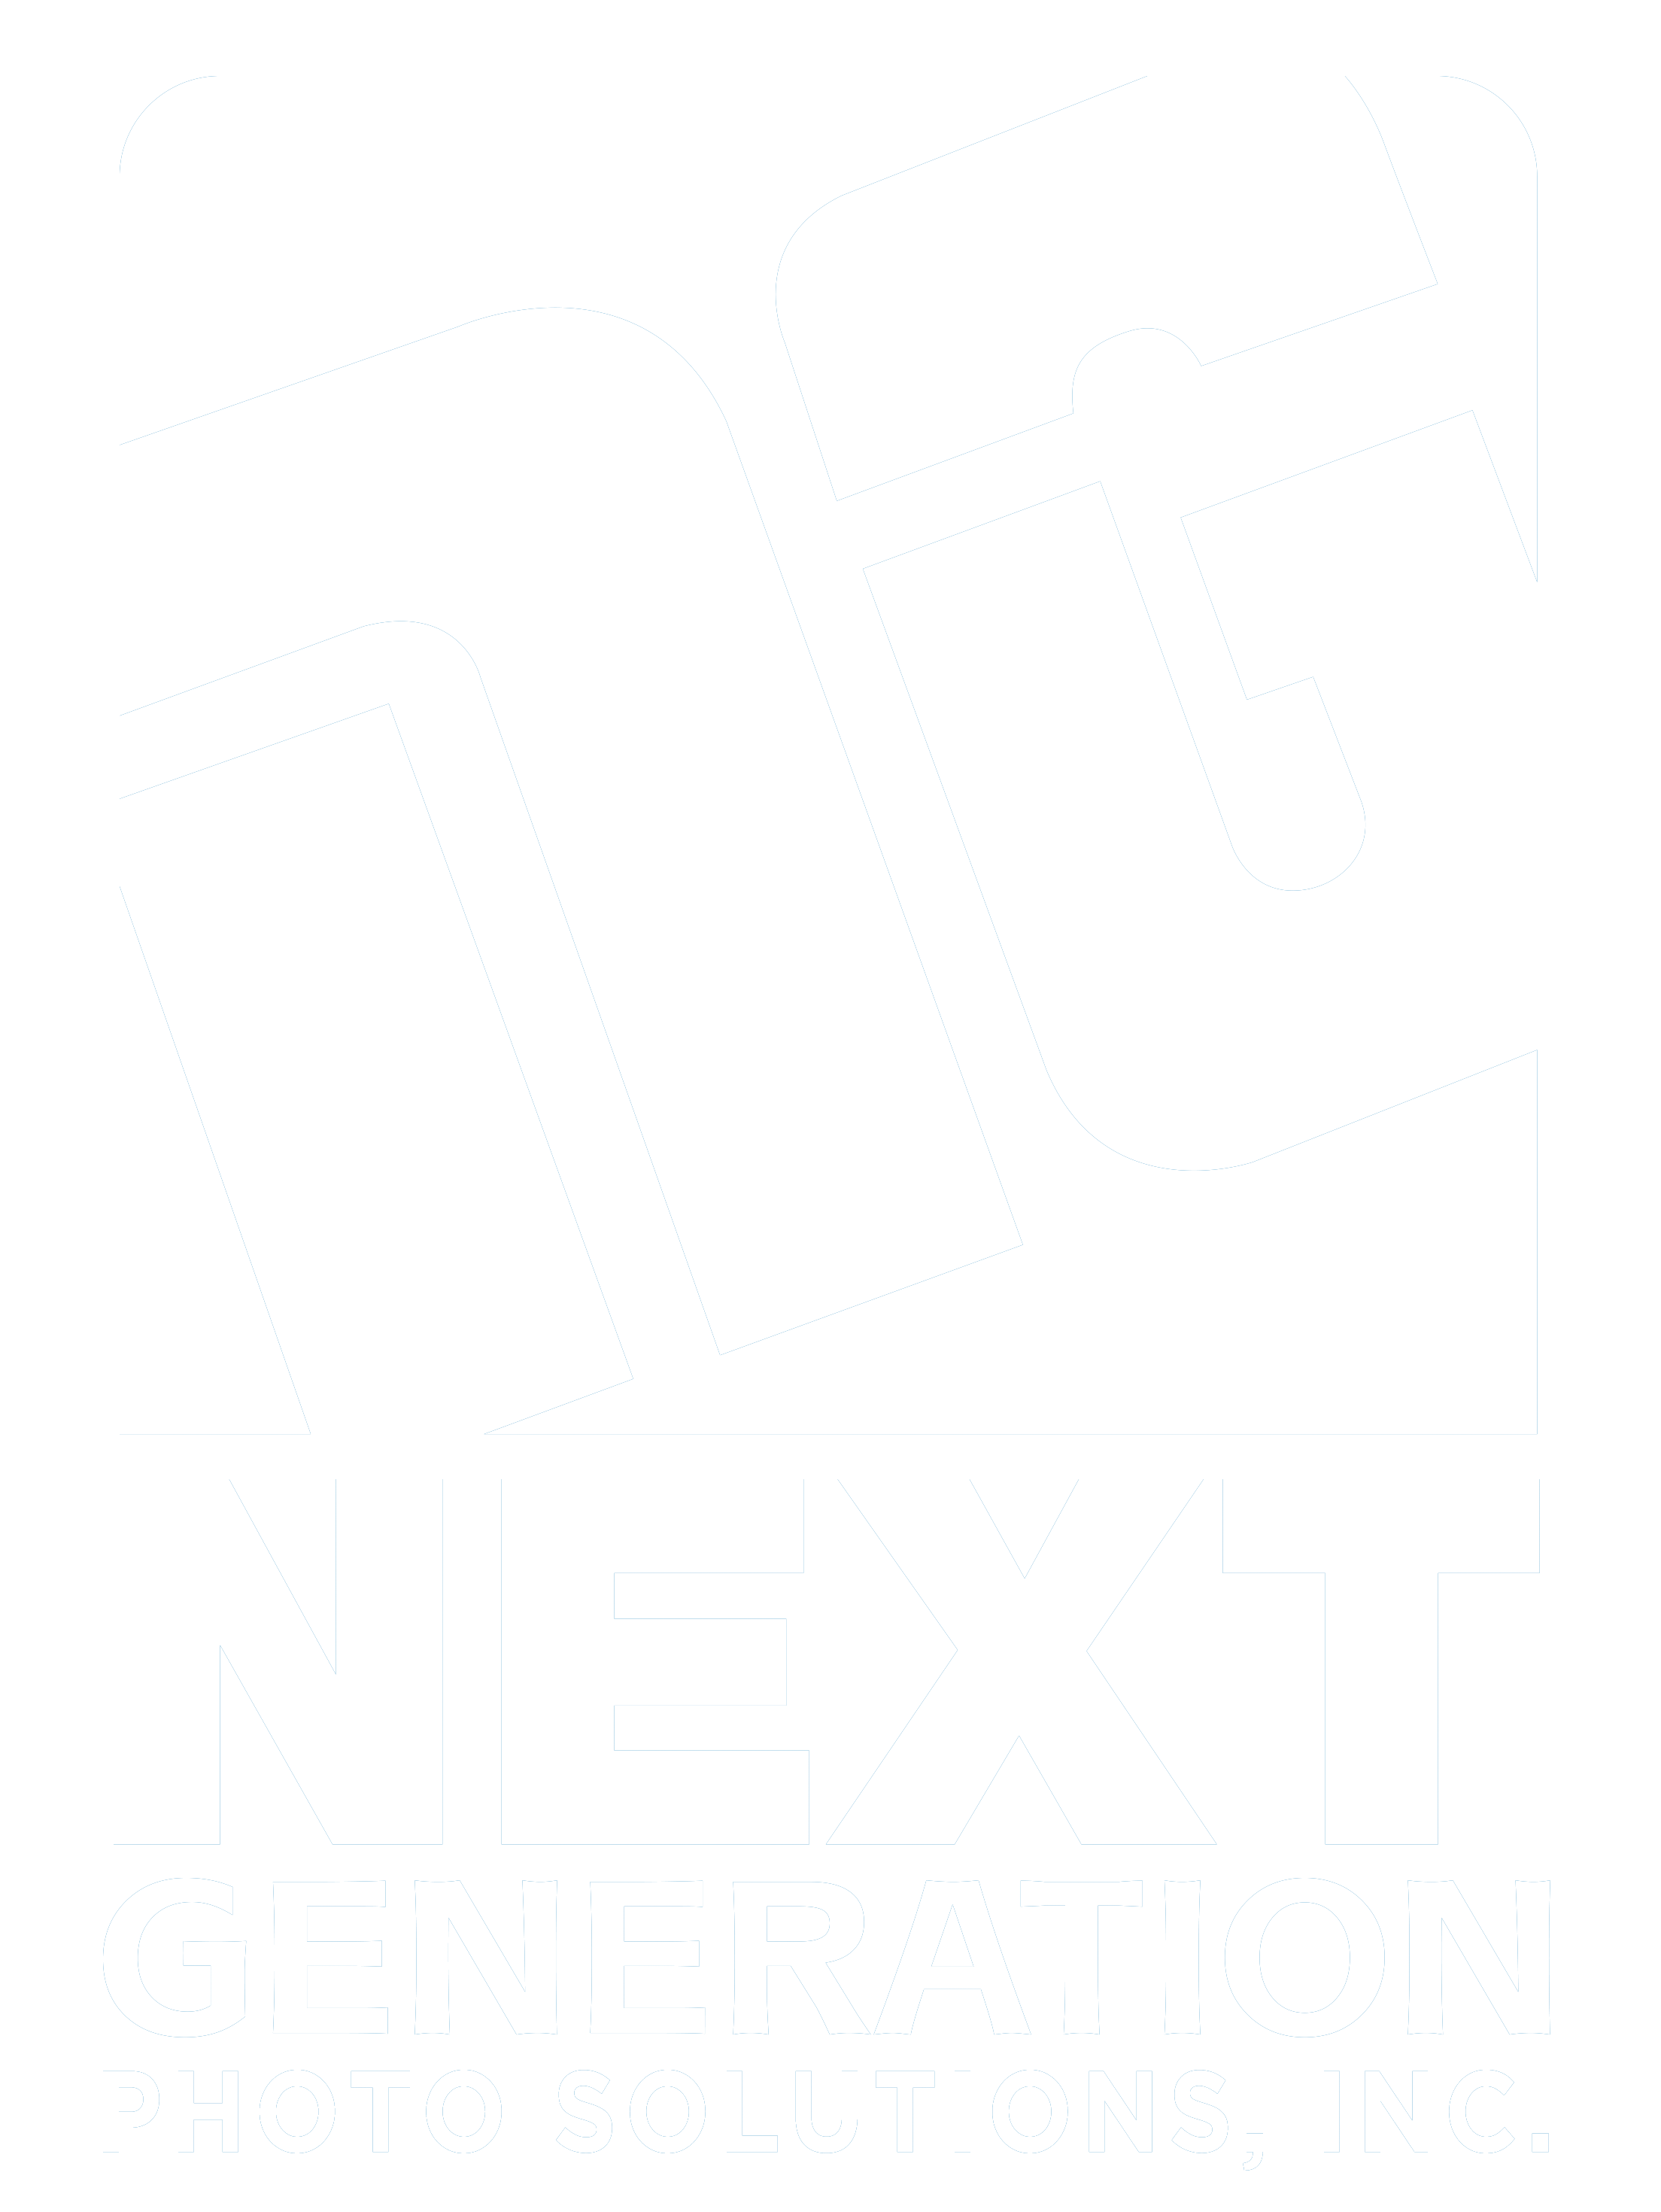 Next Generation Photography Solutions, Inc.